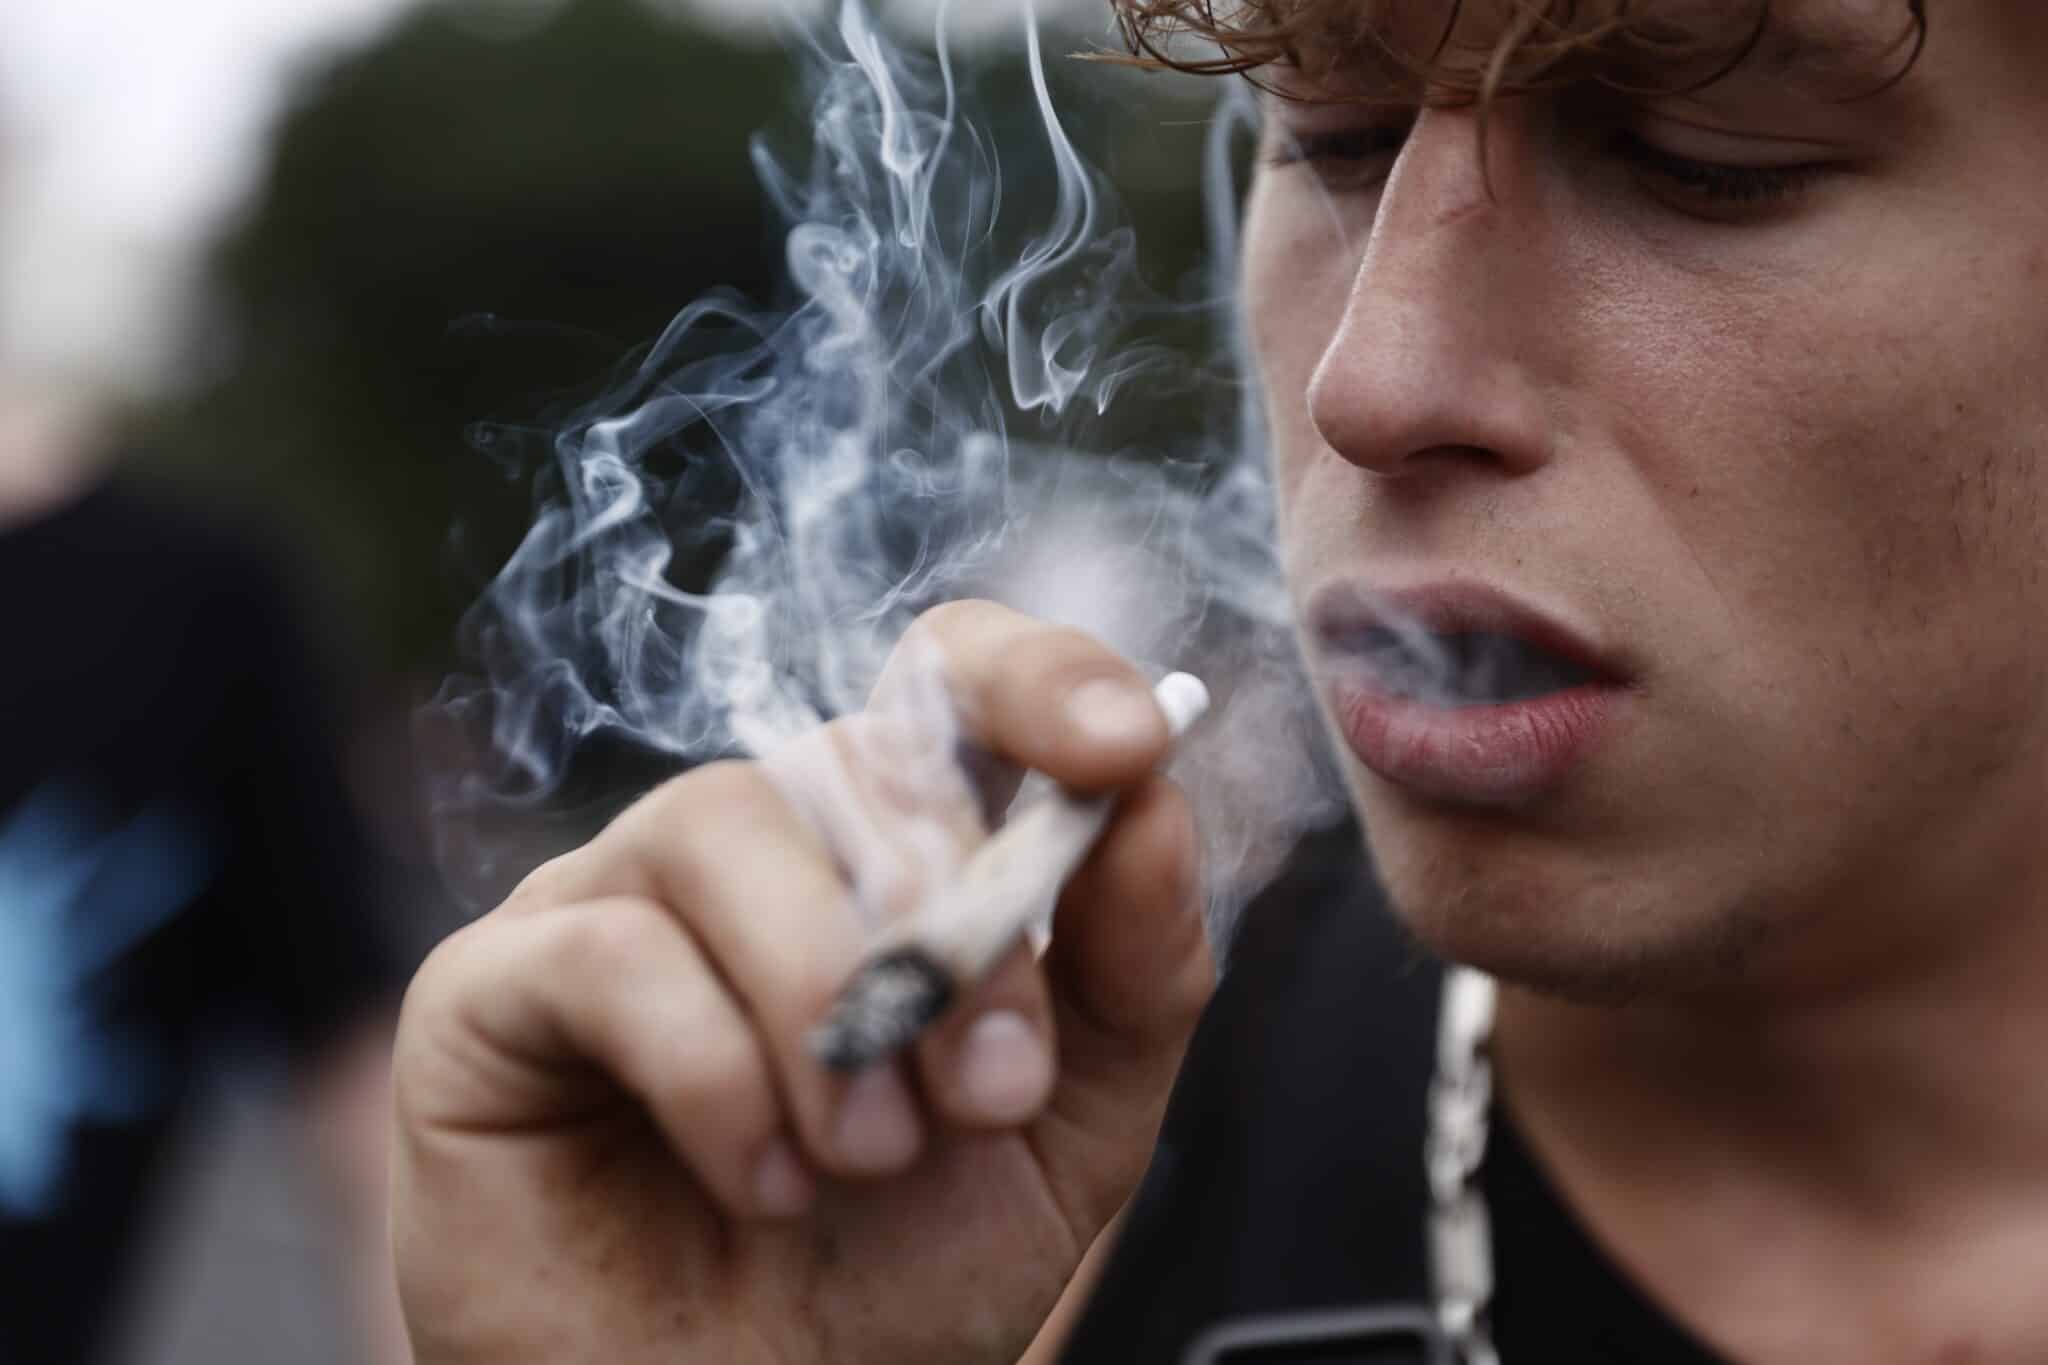 BERLIN, GERMANY - AUGUST 13: An participant smokes as activists demonstrating for the legalisation of marijuana march in the annual Hemp Parade (Hanfparade) on August 13, 2022 in Berlin, Germany. So far owning, cultivating and selling cannabis in Germany is still illegal, though the current coalition government campaigned on cannabis legalisation and is scheduled to begin debating corresponding legislation in coming months. (Photo by Carsten Koall/Getty Images)